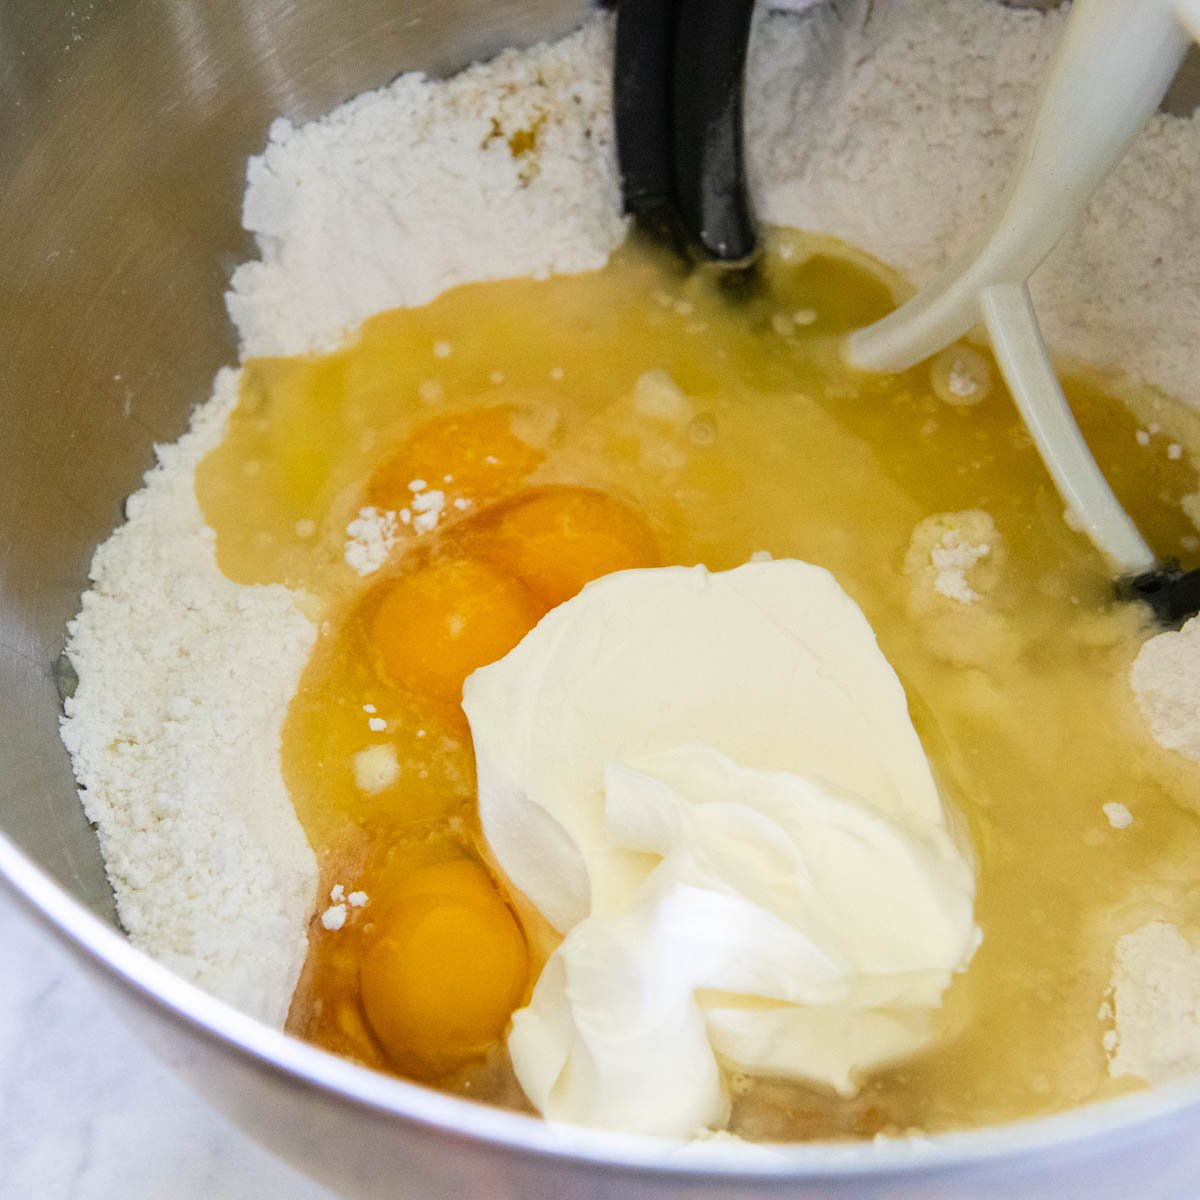 the dry ingredients being mixed with the sour cream, oil, eggs, and sour cream.